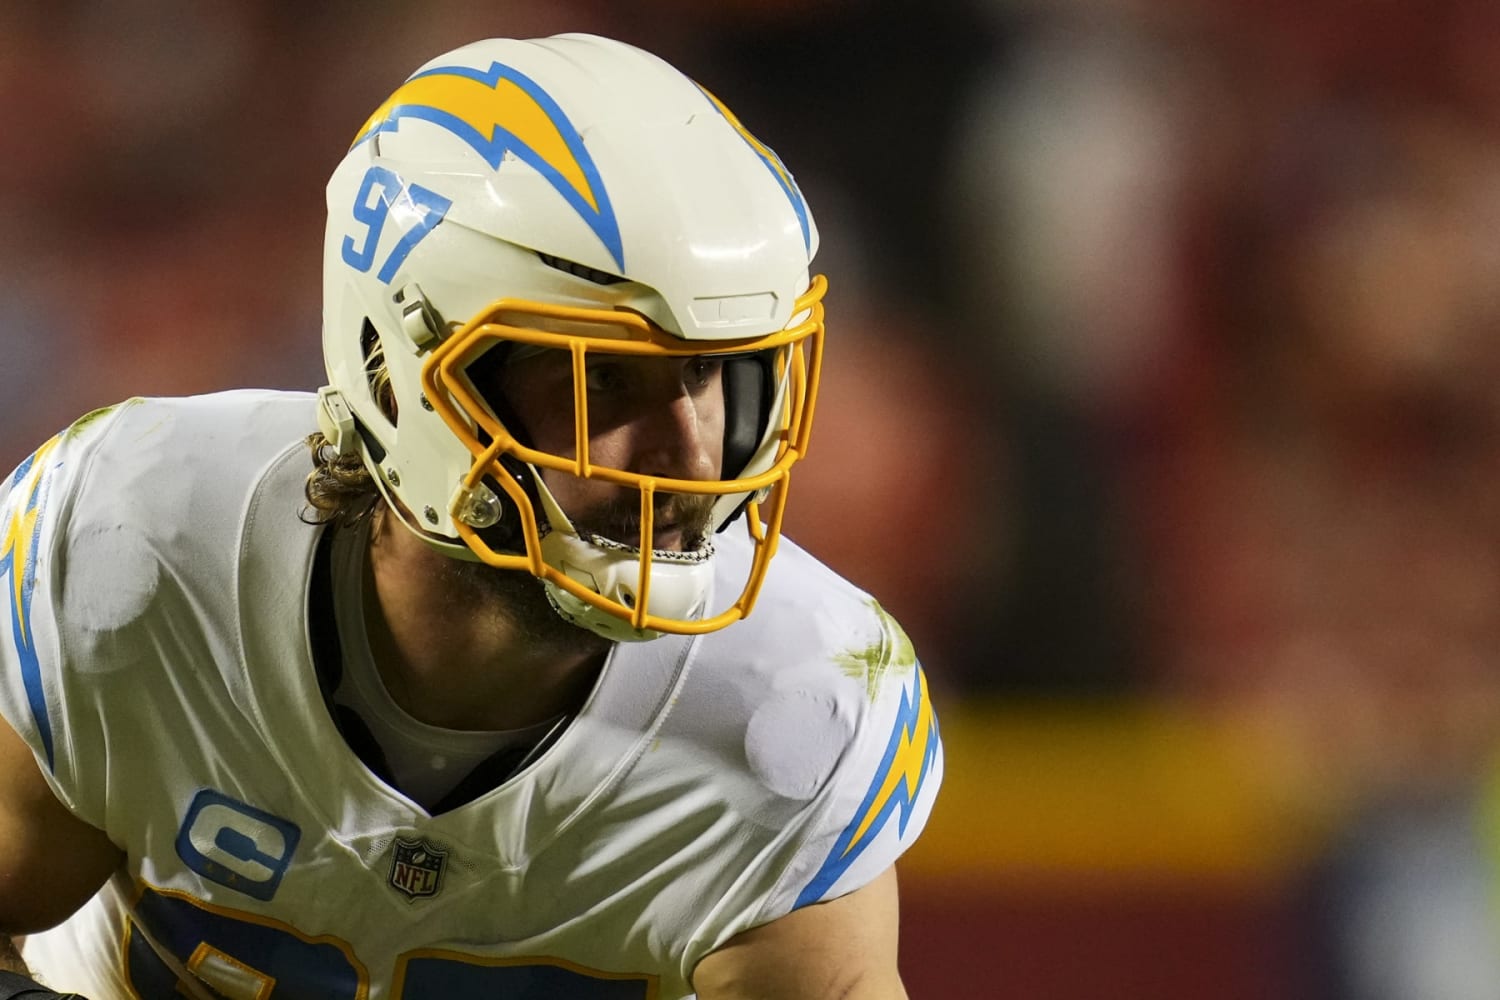 Chargers EDGE Joey Bosa ate up to 5,000 calories to gain weight